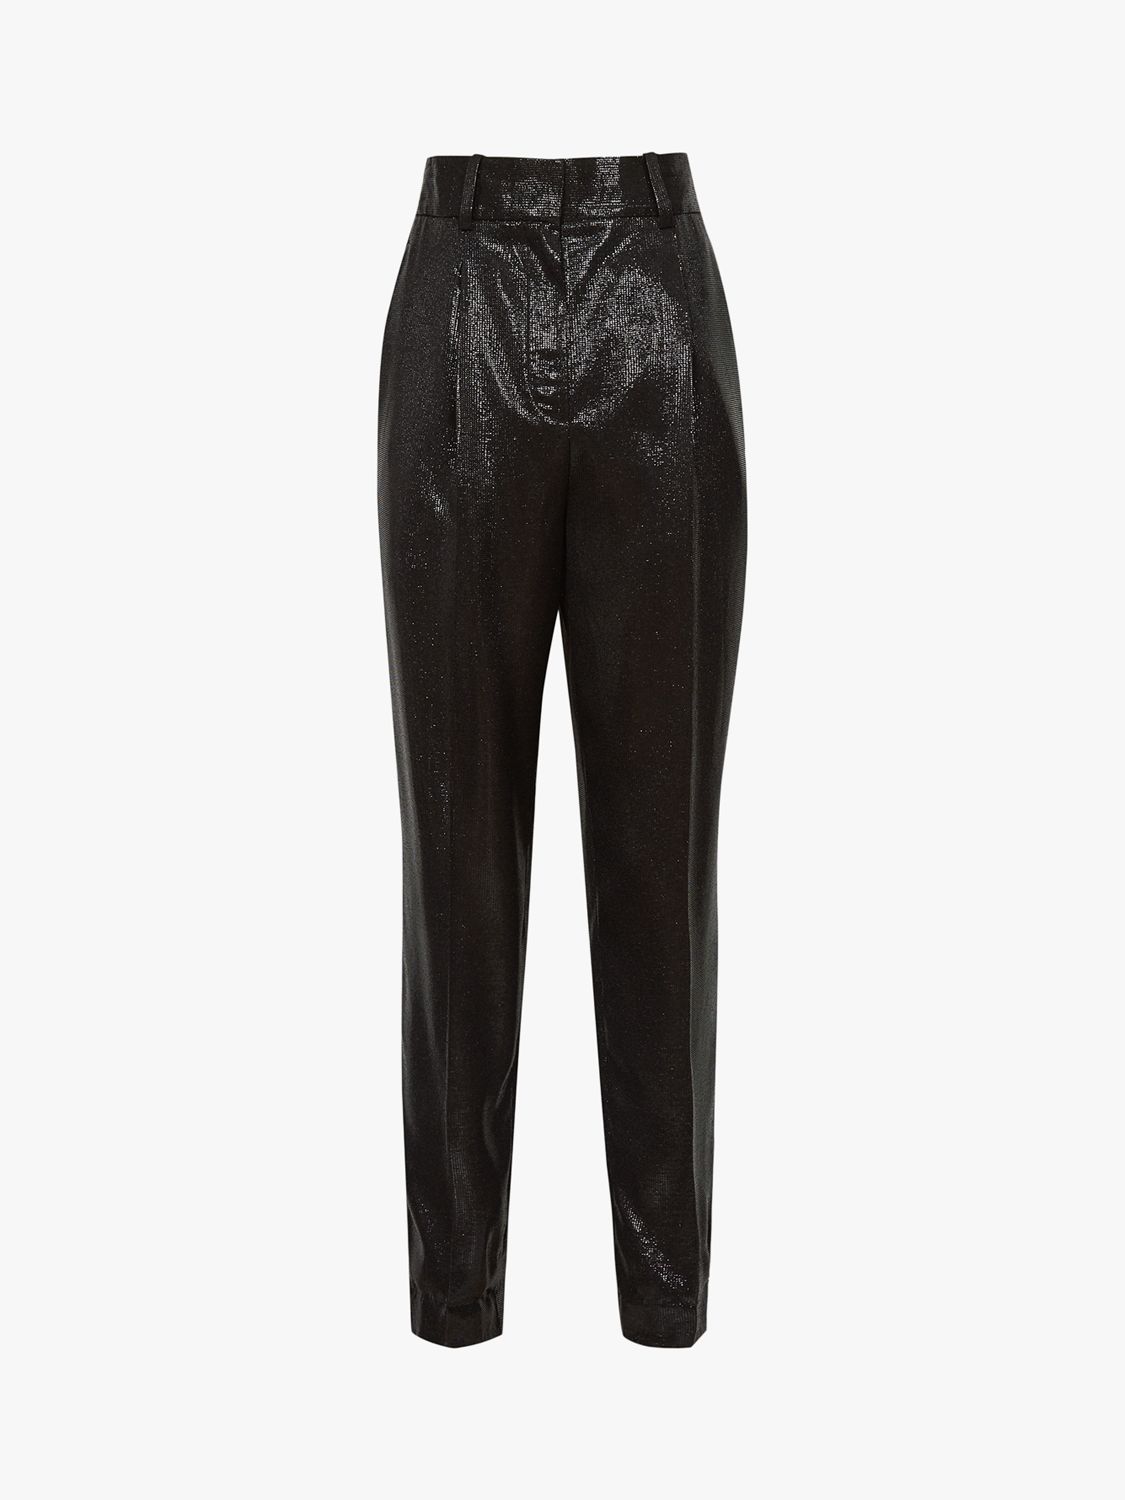 Reiss Abby Shimmer High Waisted Trousers, Black